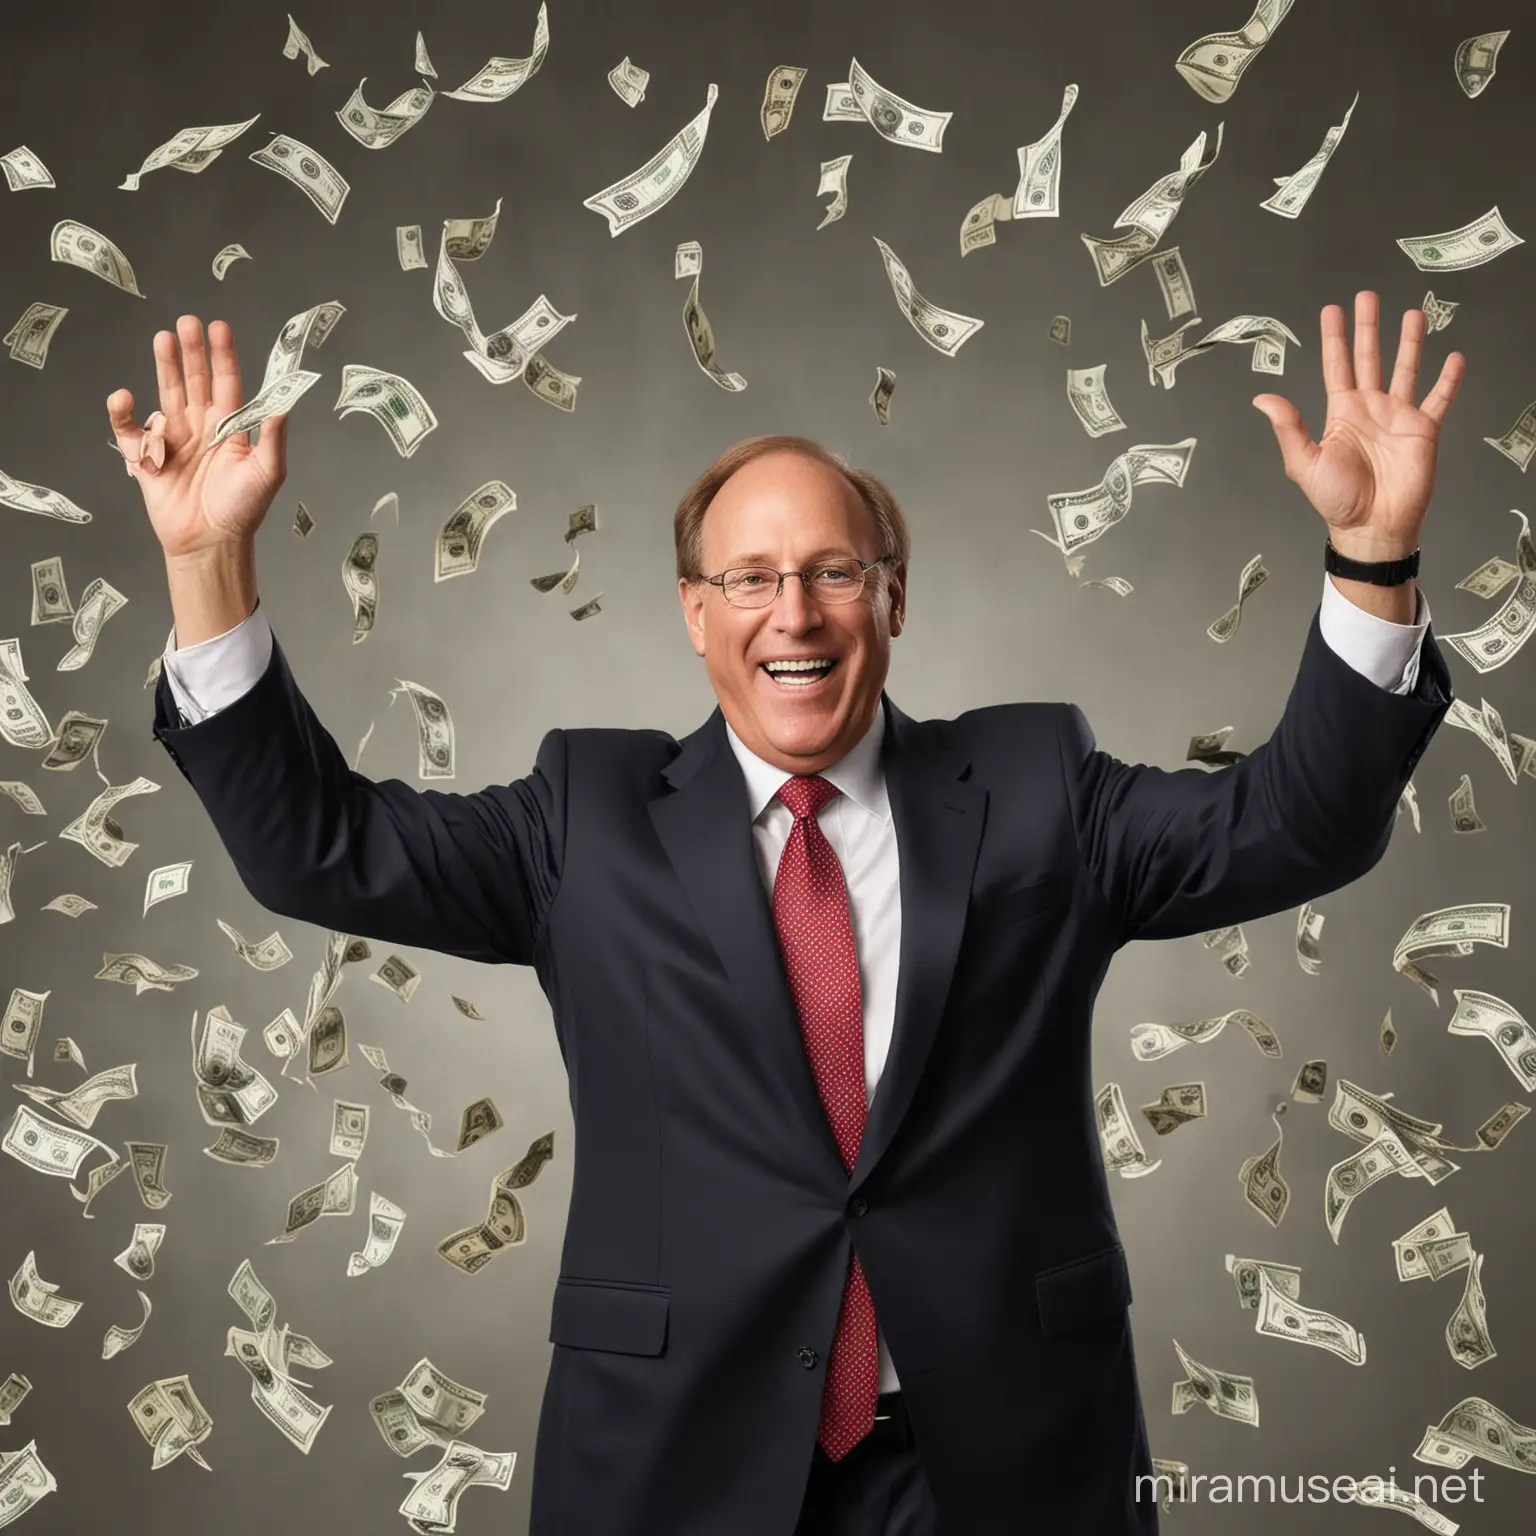 Create a image of Owner of blackrock Larry Fink Is Happy And Celebrating his success and money on his hands
